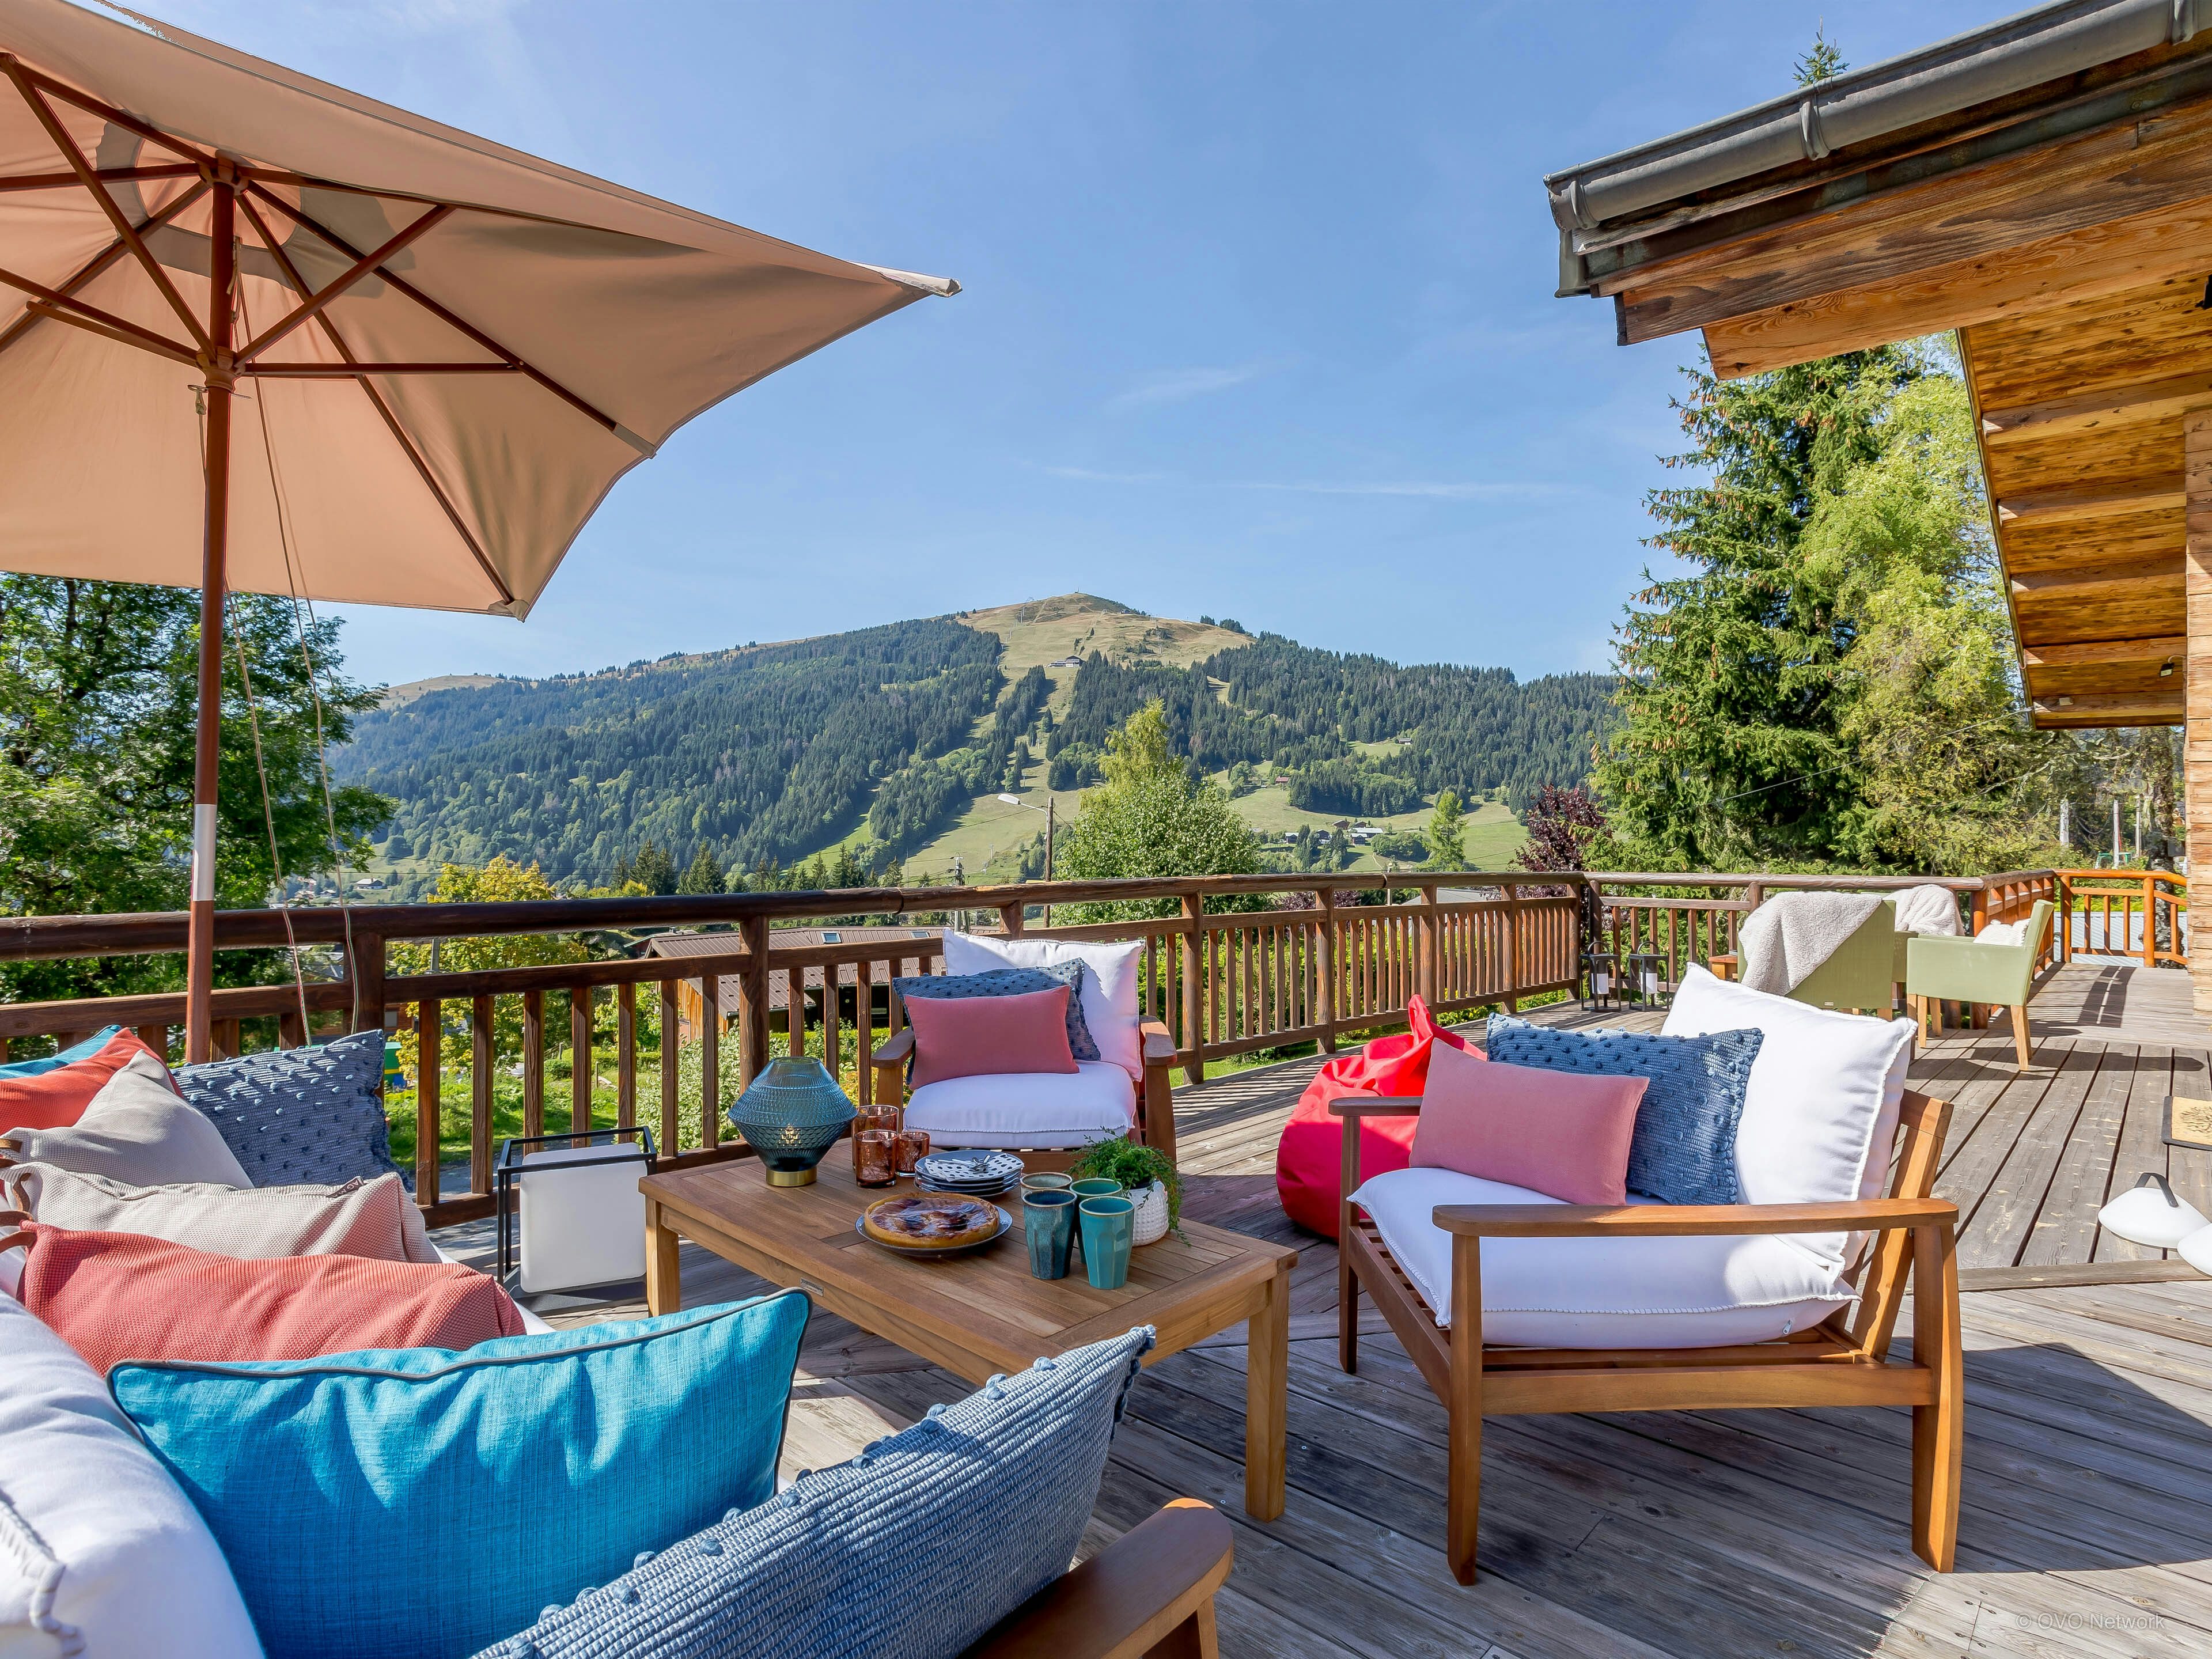 The mountain view from the terrace at Chalet Joux Verte, with chairs and a sofa covered in cushions and throws